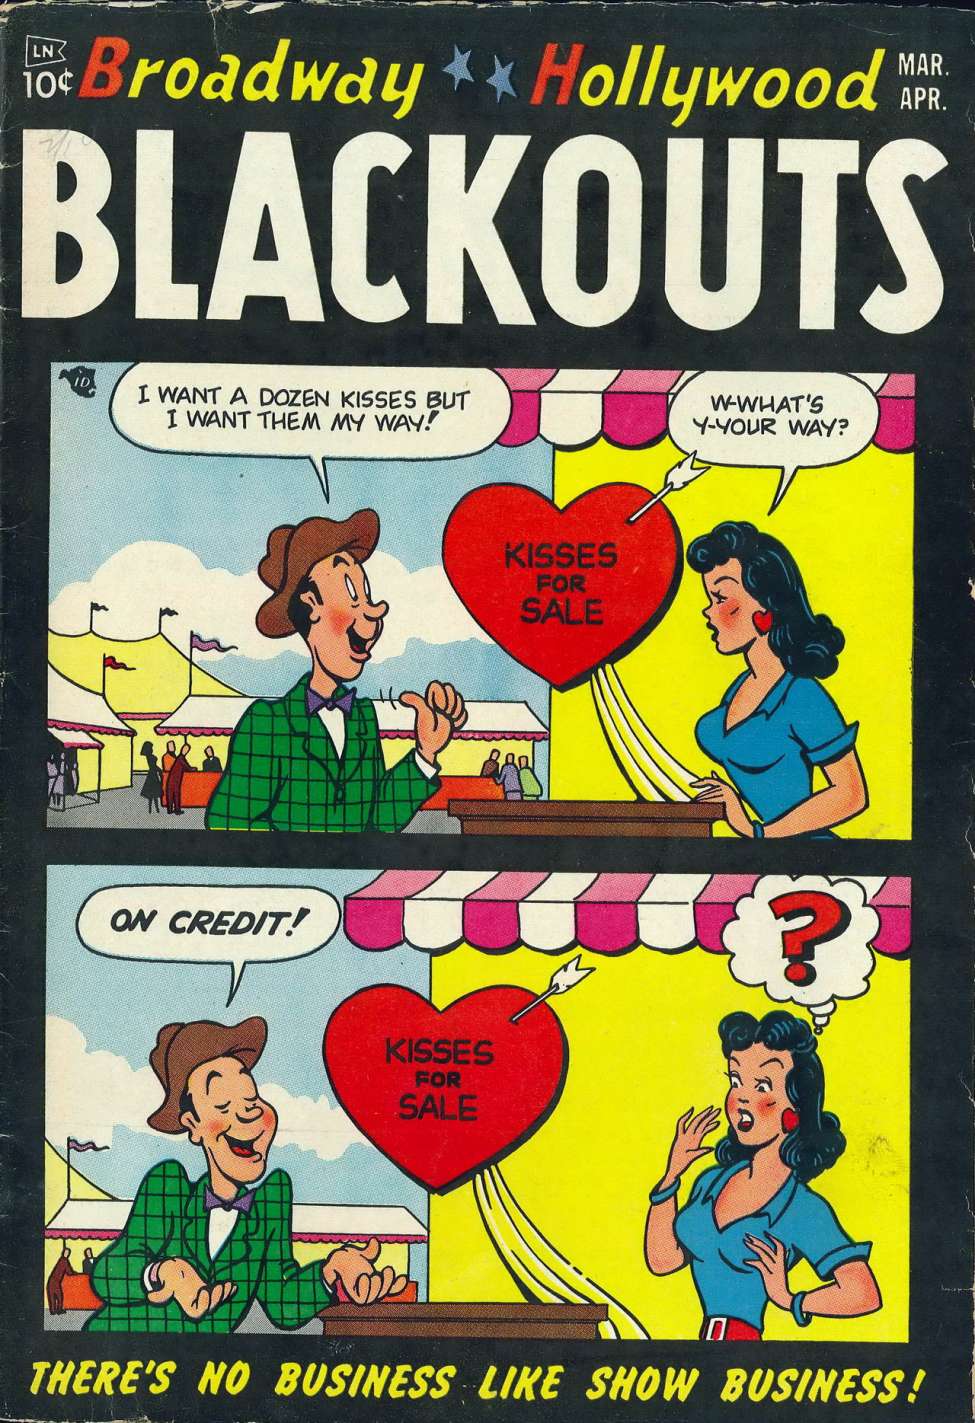 Comic Book Cover For Broadway-Hollywood Blackouts 1